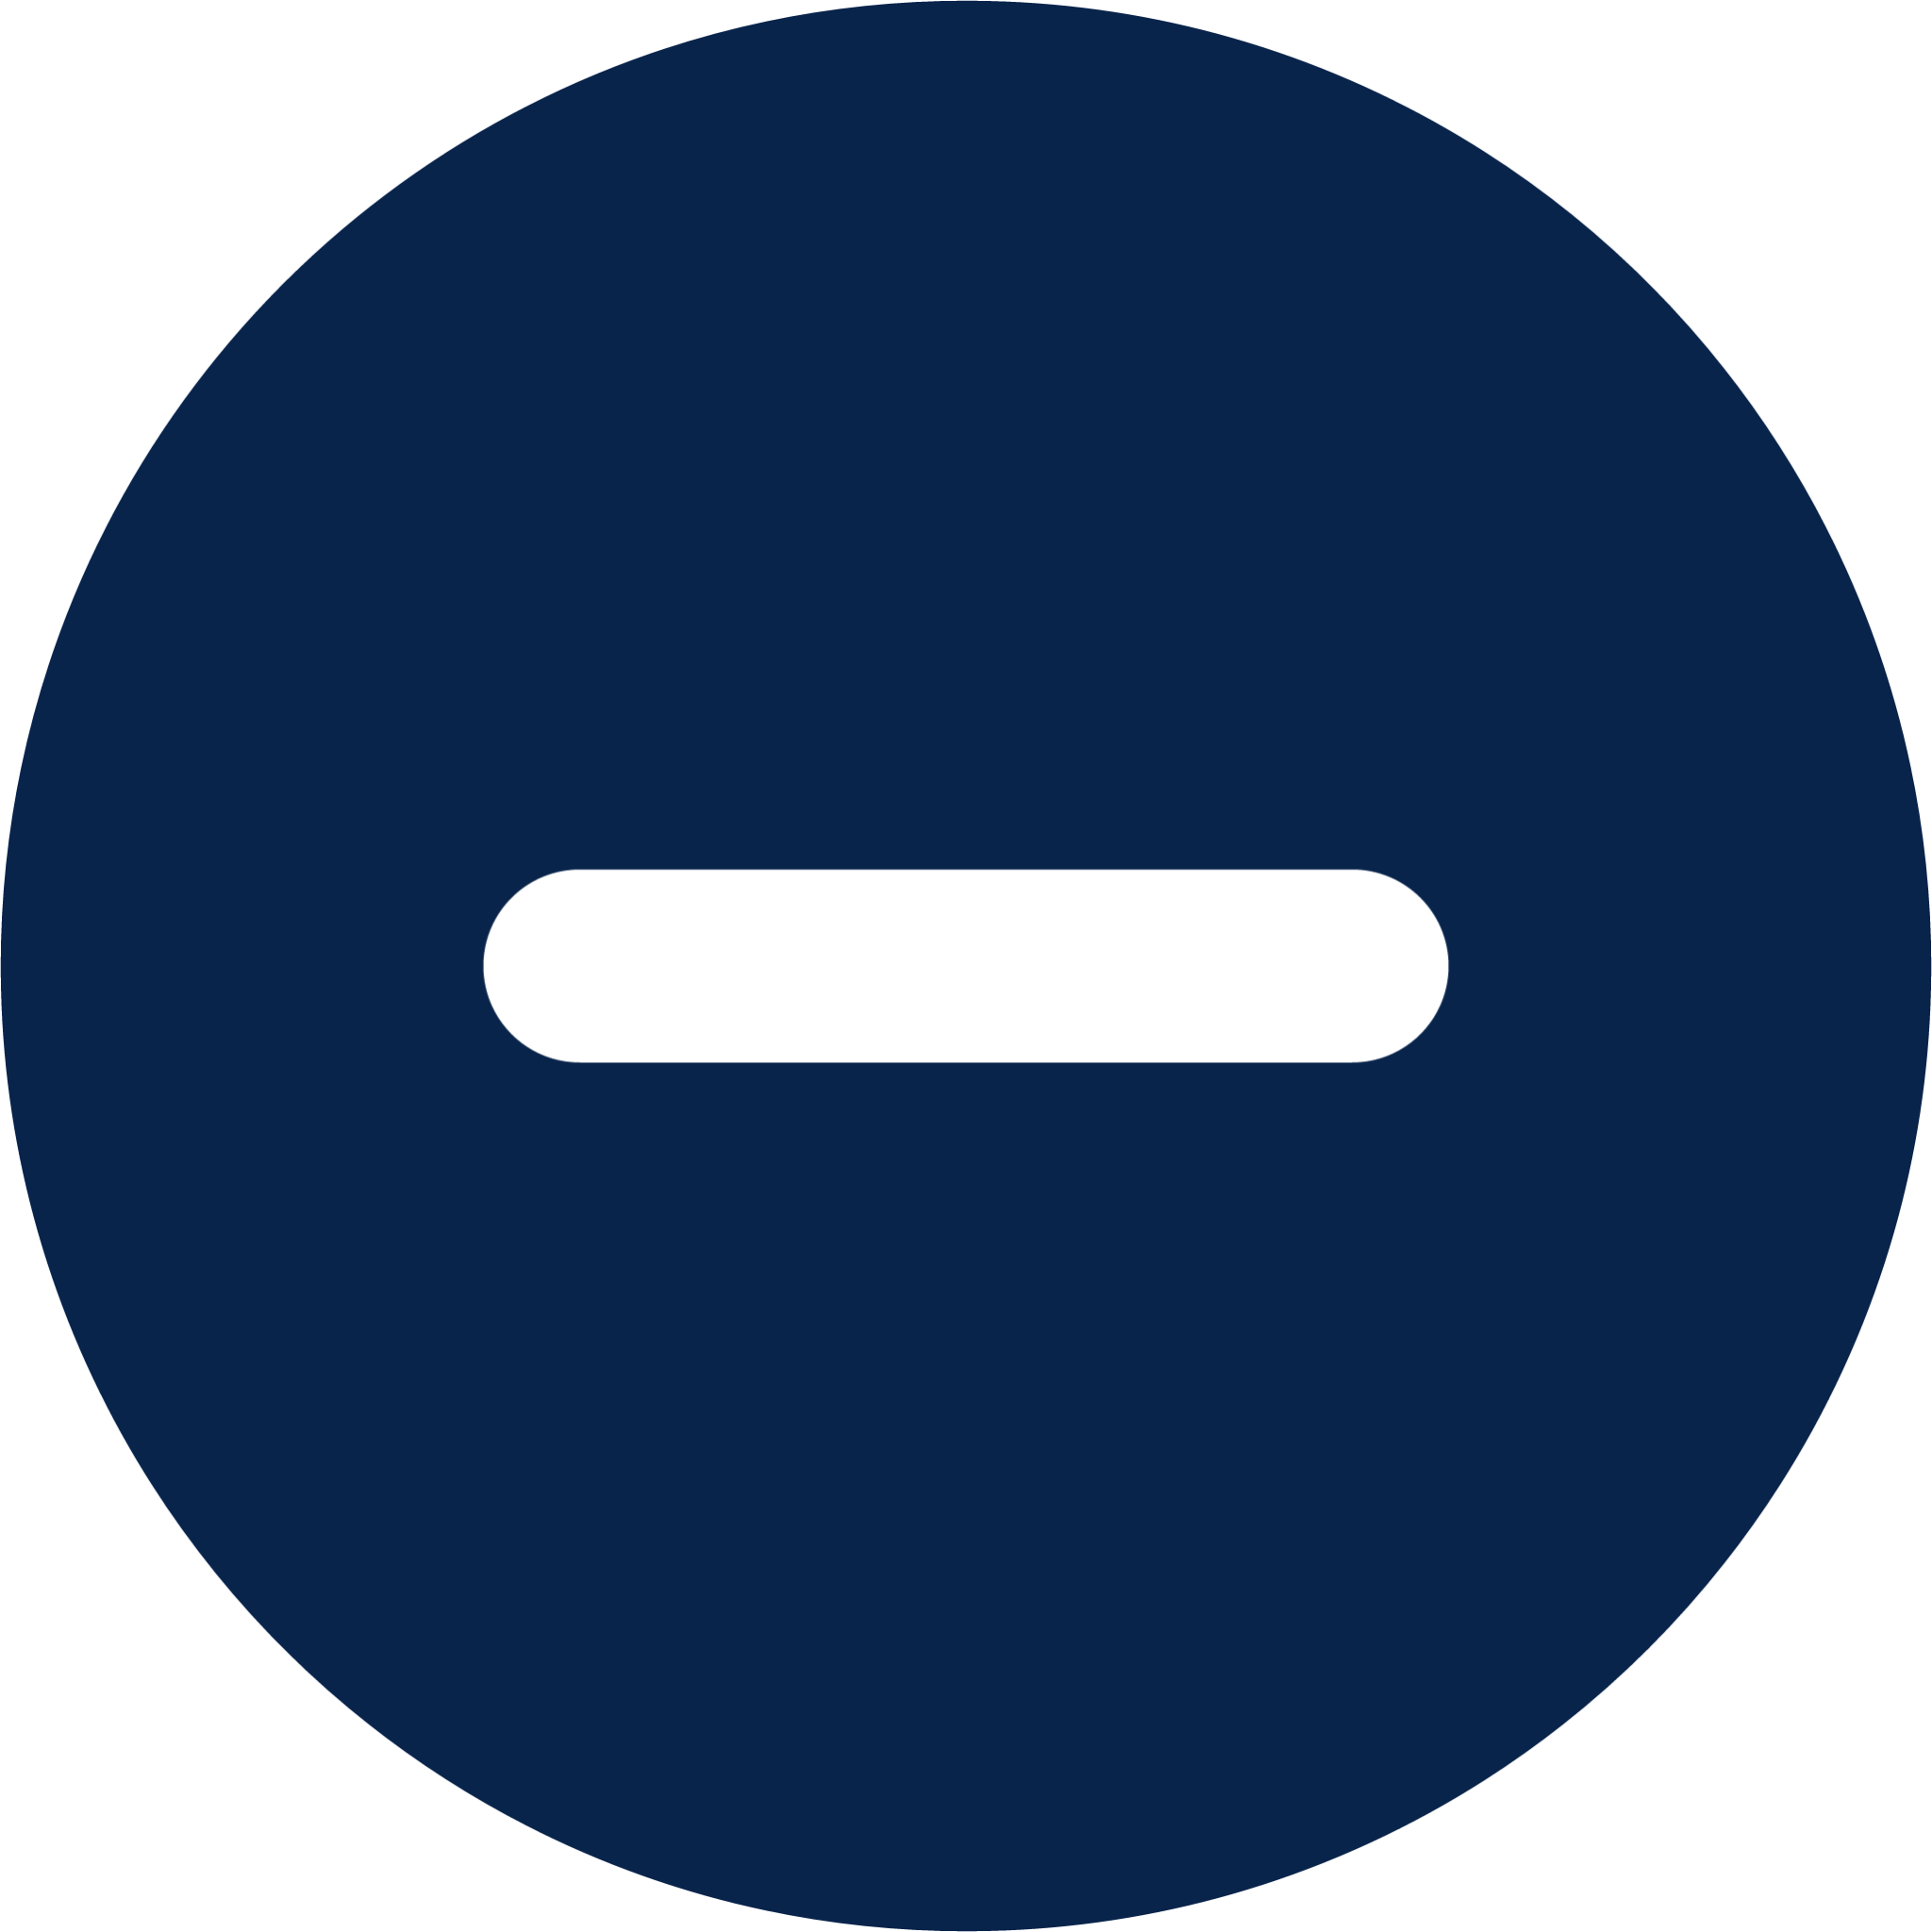 minus circle fill system icon